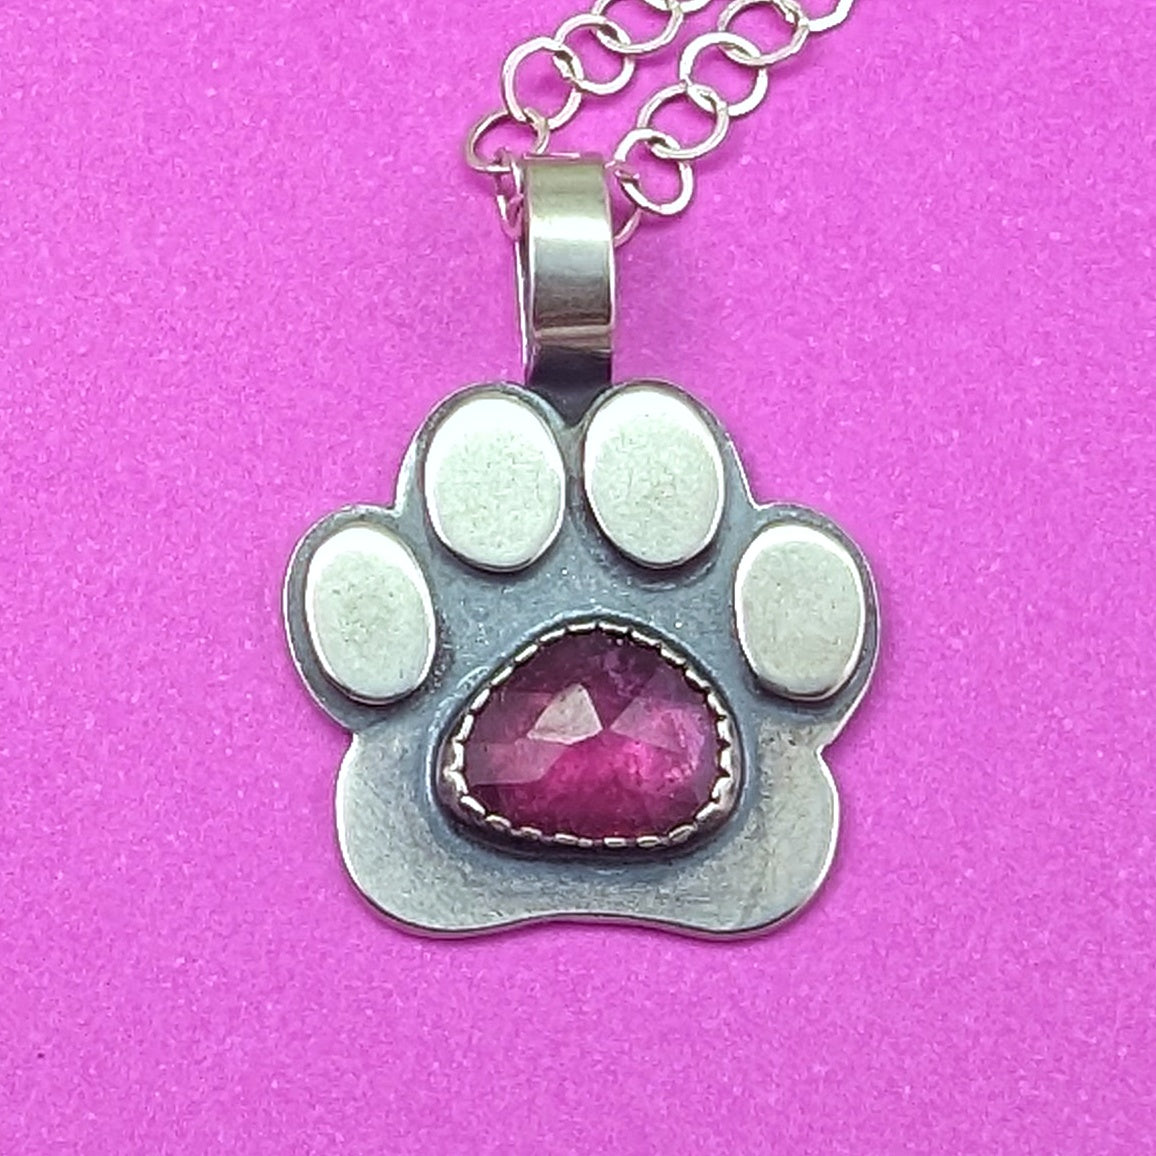 Paw Print Necklace - Ruby